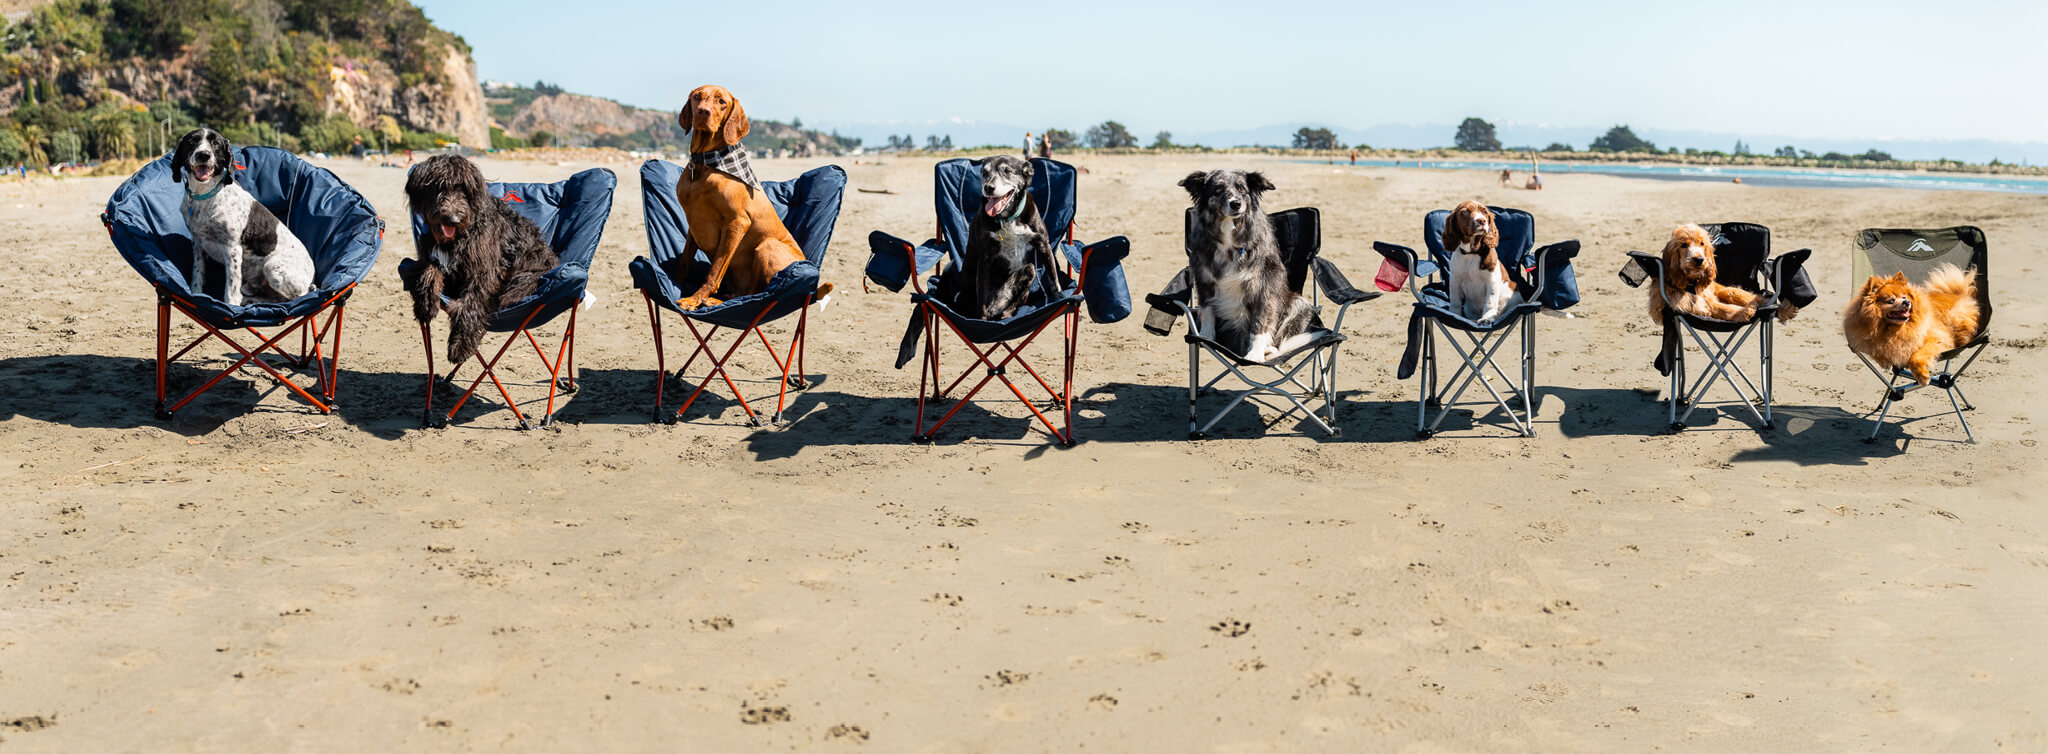 Dogs sitting in Camp chairs on a beach